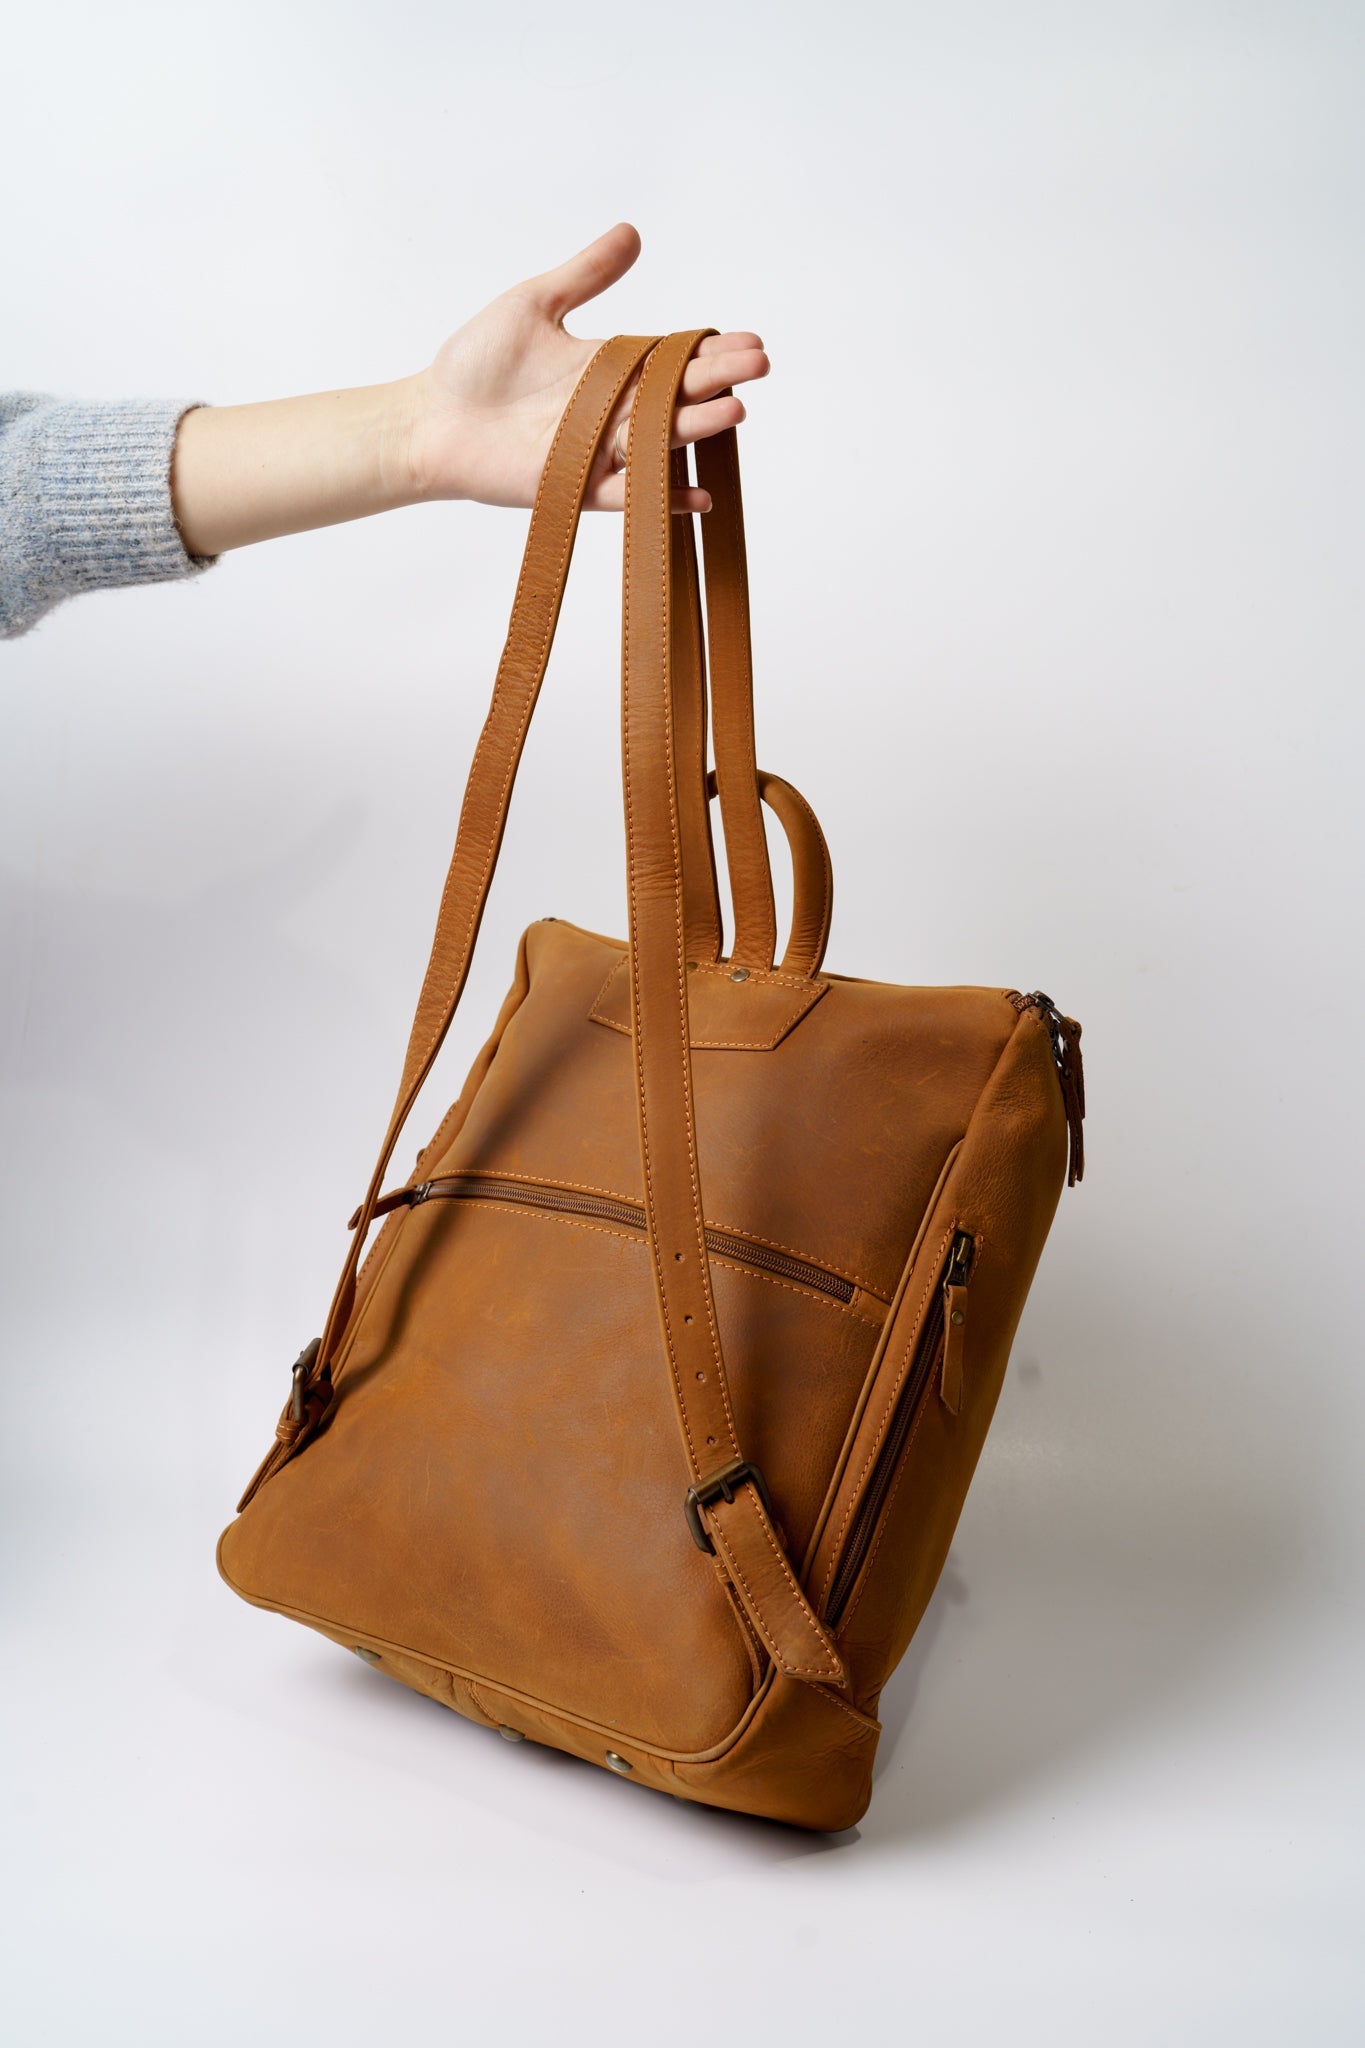 Rear view of Chamra's light brown satchel backpack. The bag can be seen dangling from the hand of a model, showcasing durability and the adjustable buckles on the shoulder straps.